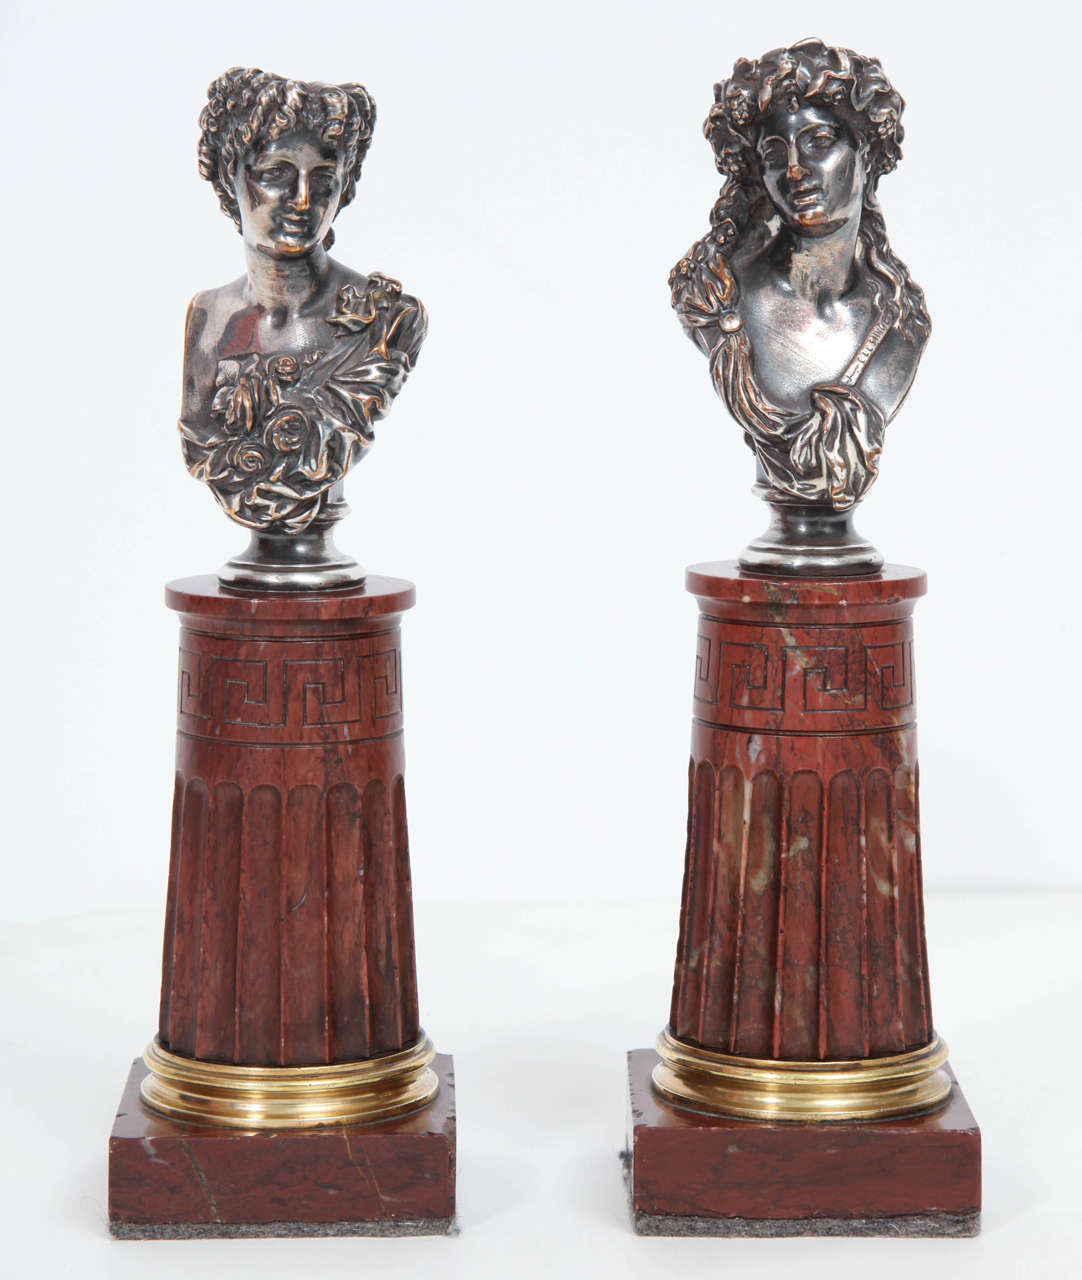 Jean-Baptisite Clesinger (French. 1814-1883): A pair of silvered bronze and rouge marble busts of a Bacchante couple, cast by Marny Hac, 1 Rue de la Paix, Paris. The female bust with ribbon-tied drapery and a sash decorated with roses at her breast,